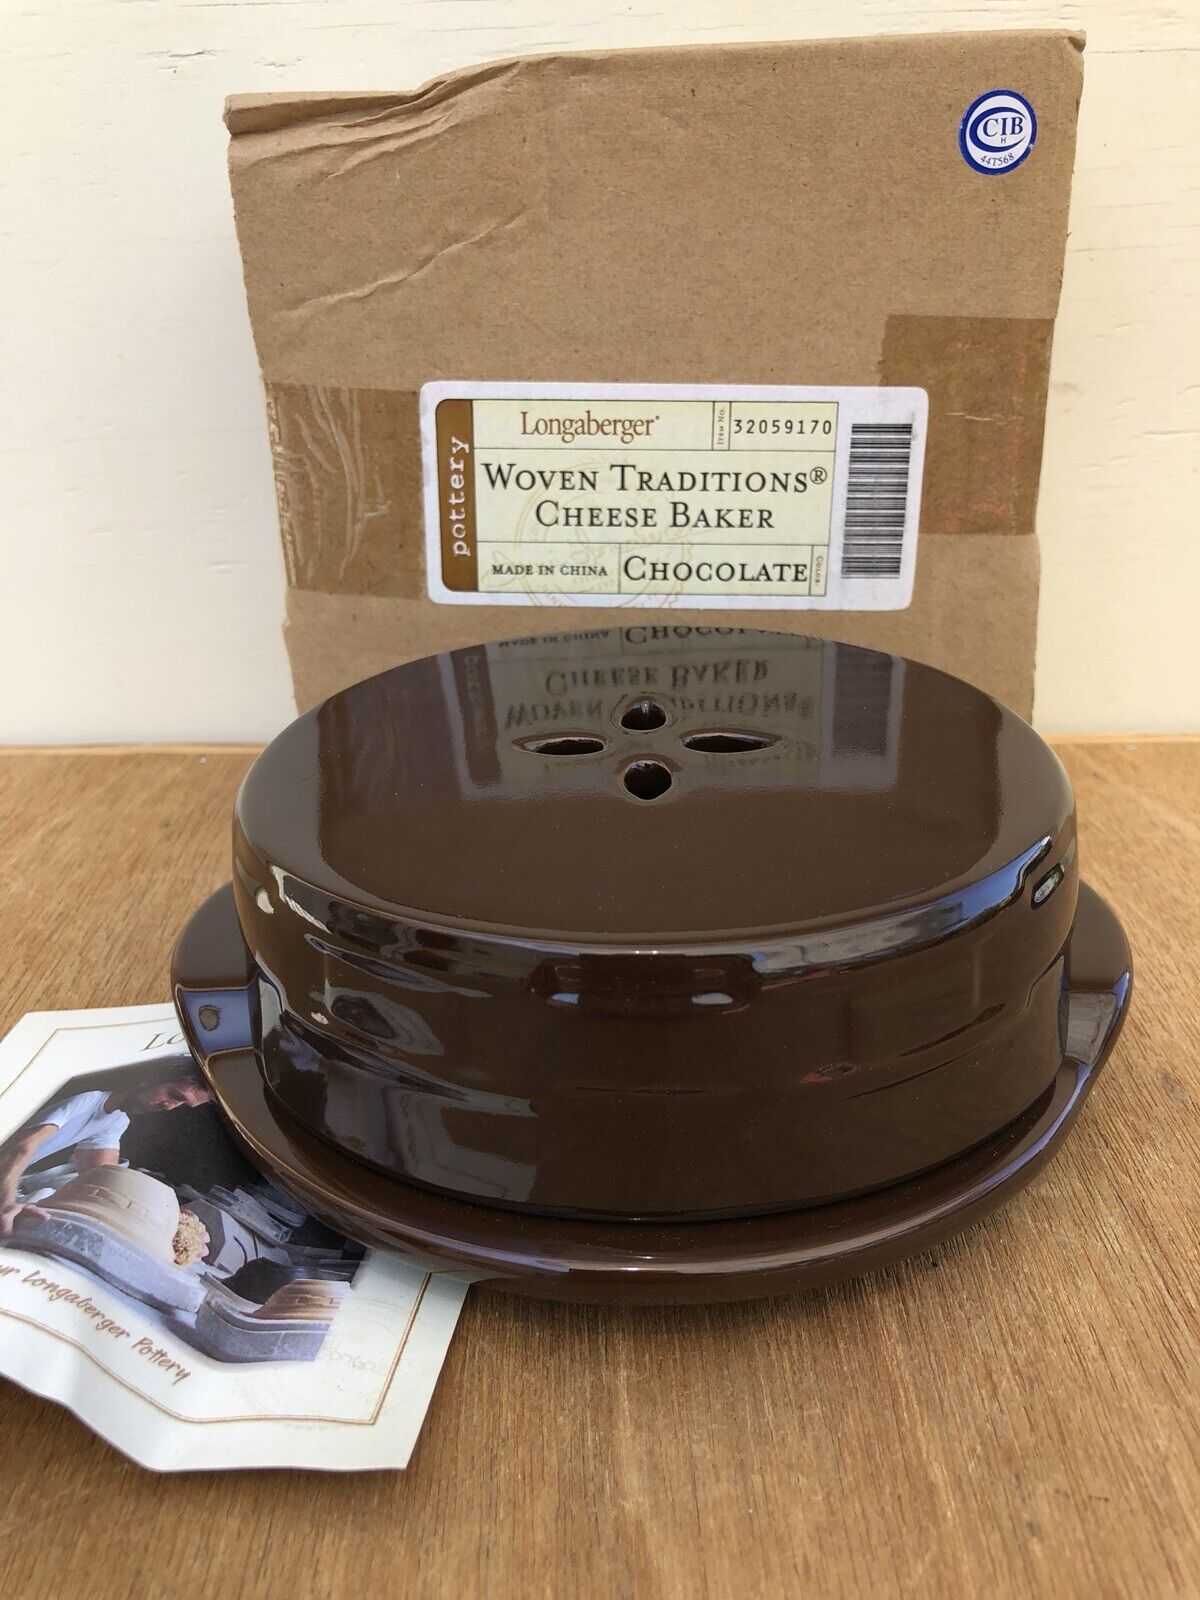 New Longaberger Pottery Woven Traditions Chocolate Brown Brie CHEESE BAKER NIB Без бренда